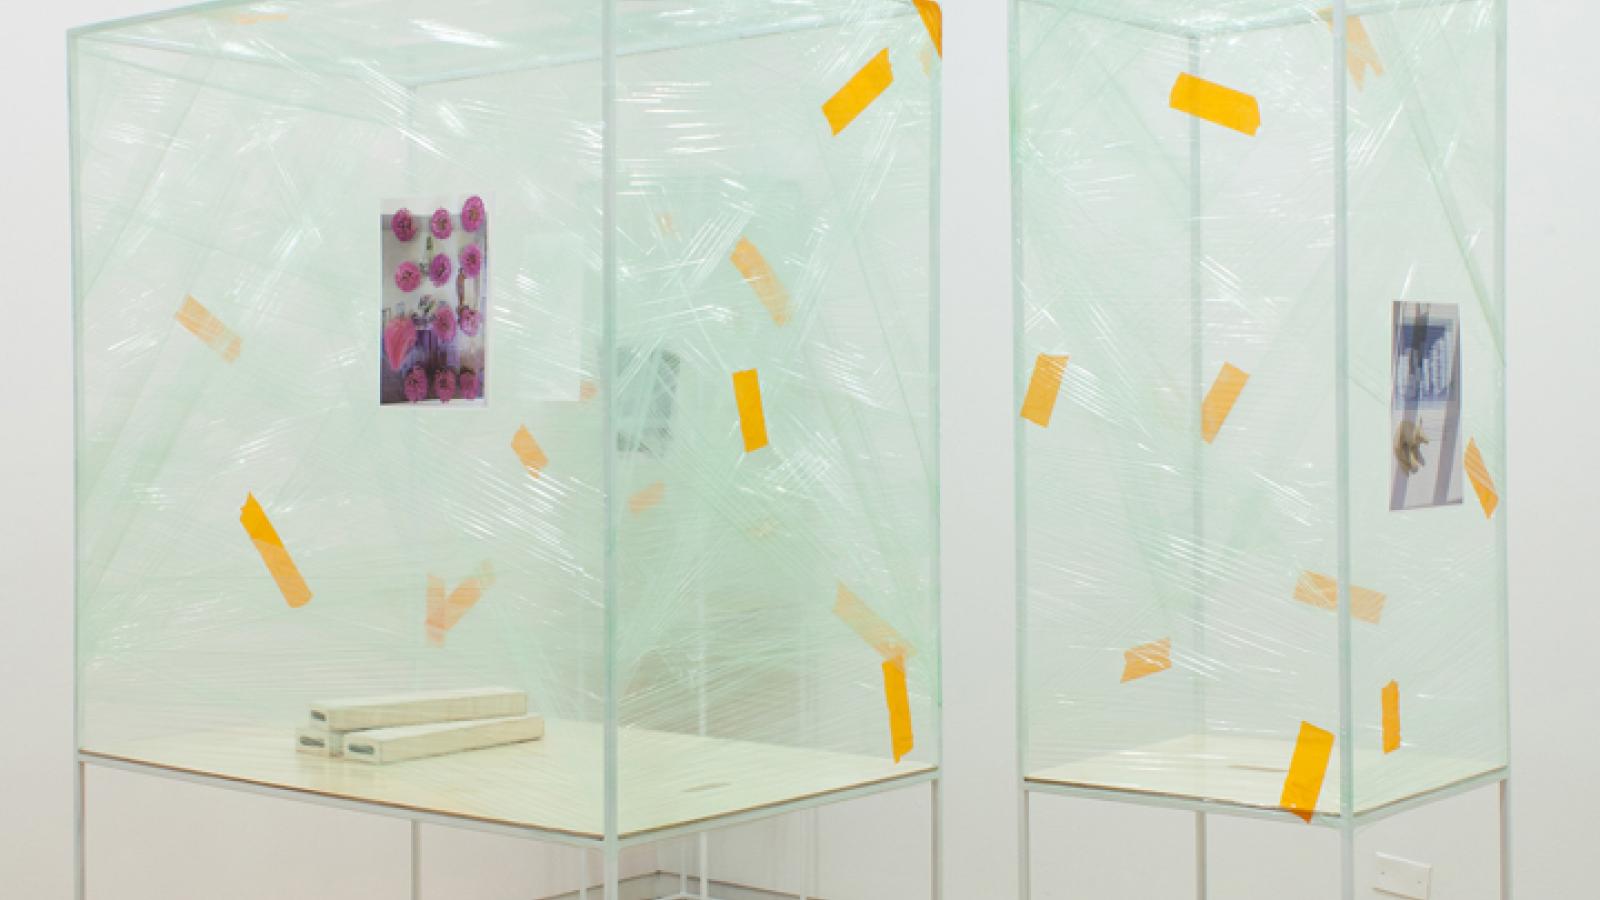 Alex Chitty, The Way They Wanted to Sleep, steel, plywood, plastic film, packing tape, laser prints, 2013